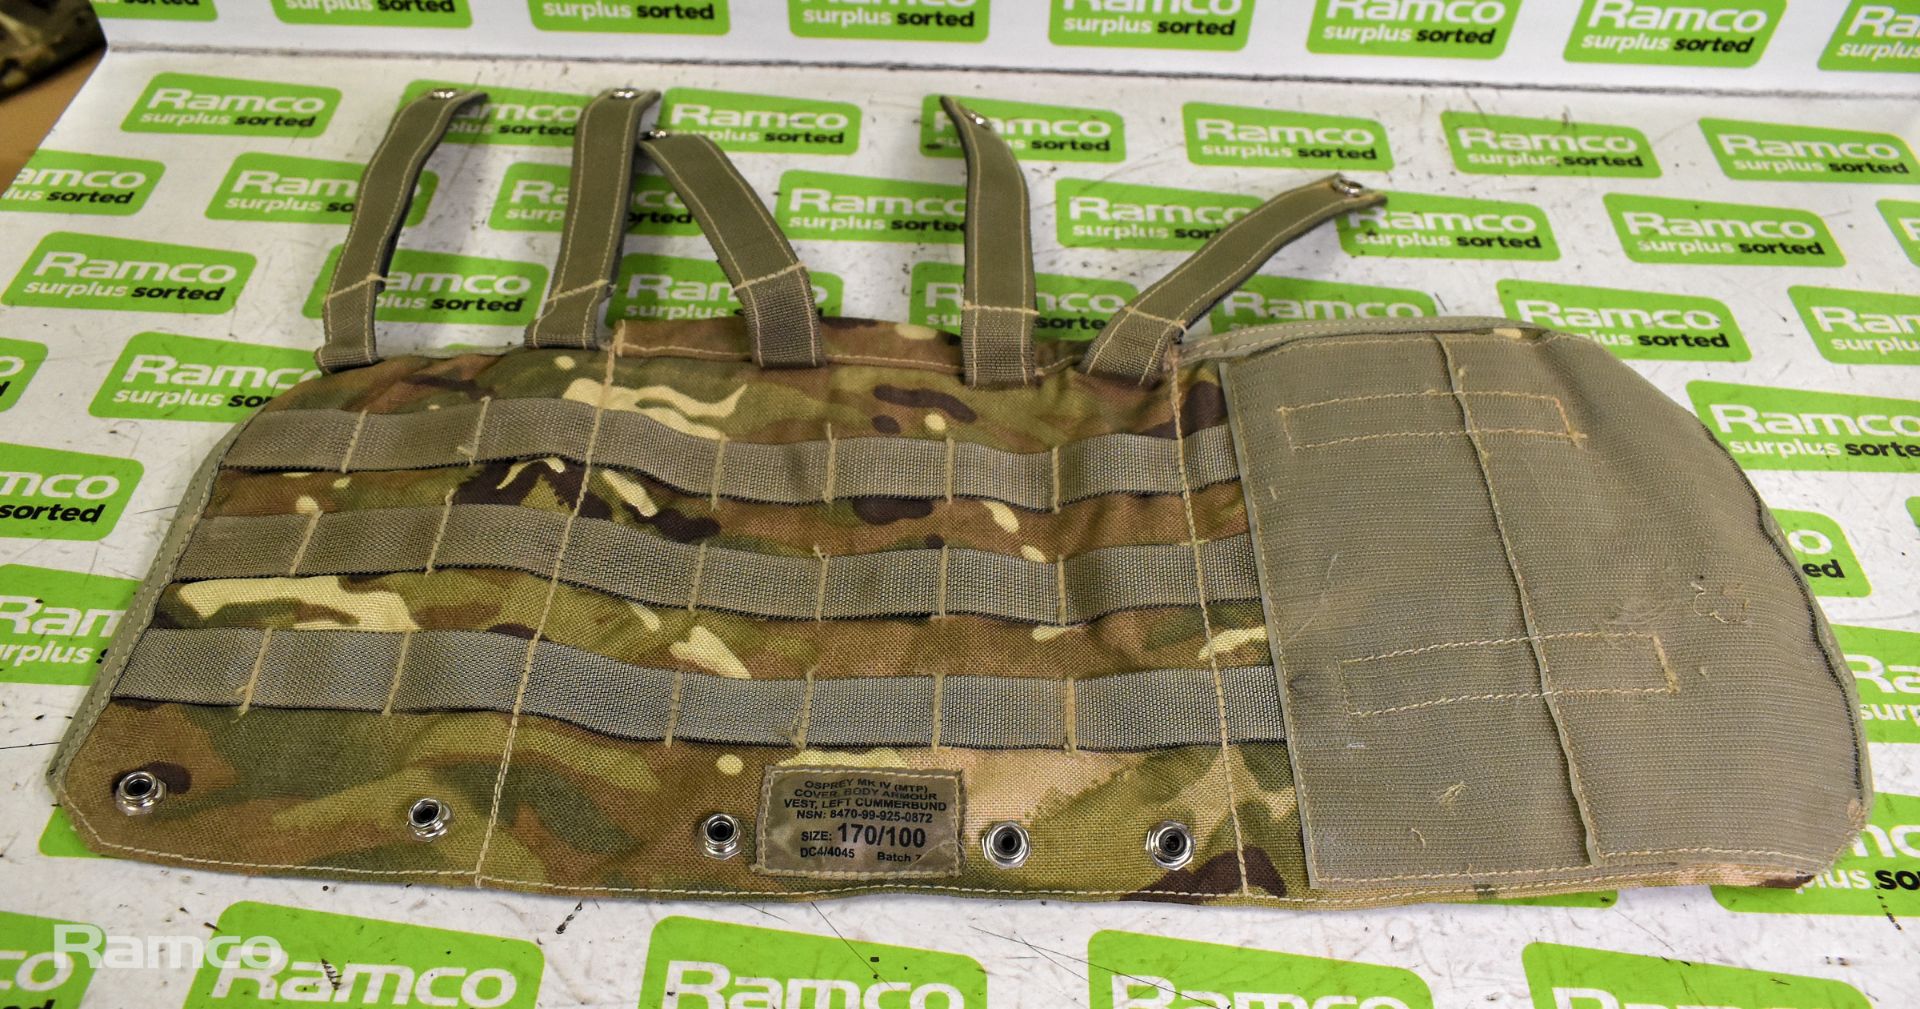 British Army body covers & ammunition pouches - see description for details - Image 8 of 16